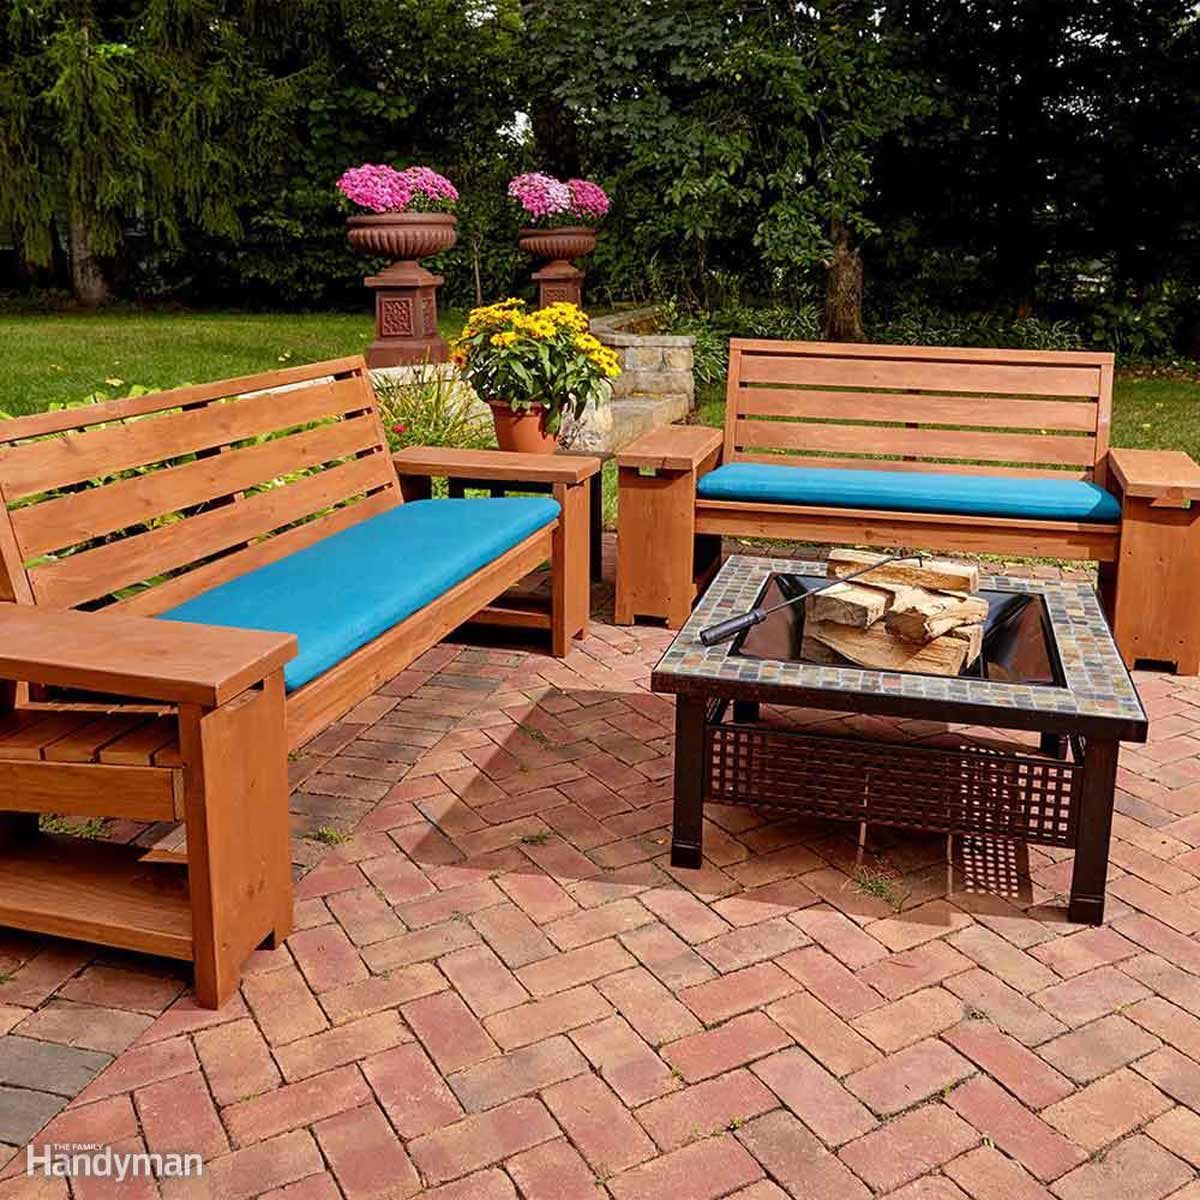 How to make your outdoor seating area look expensive in 5 easy steps